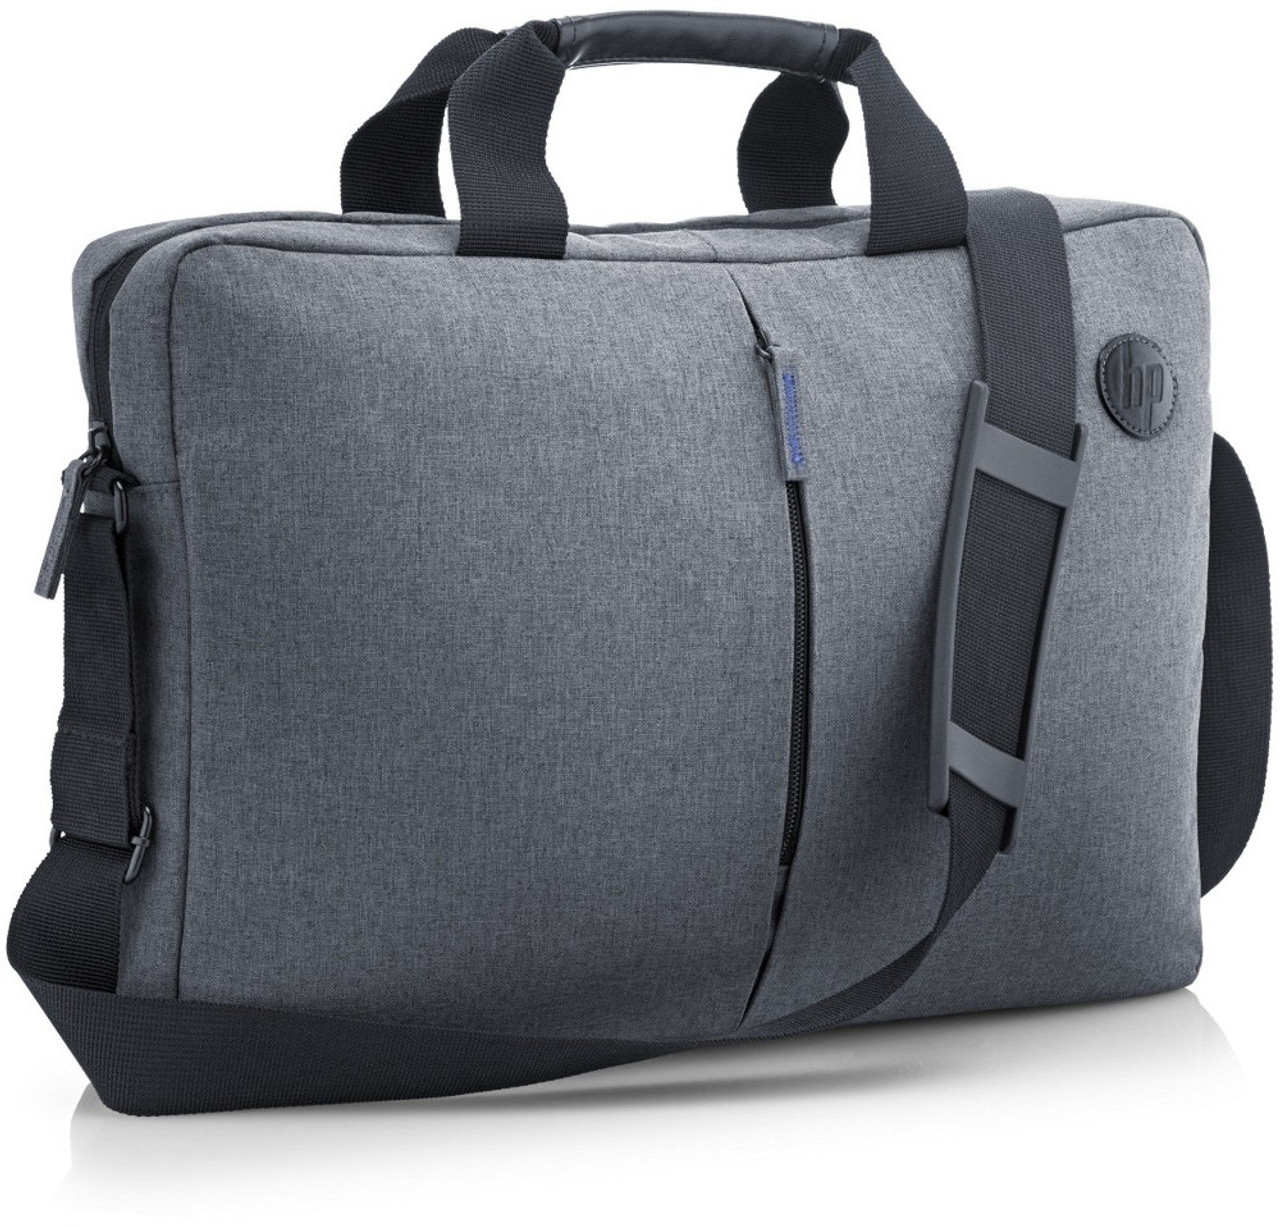 HP Executive 15 6 Backpack (6KD07AA) in Pune at best price by S K Bag House  - Justdial